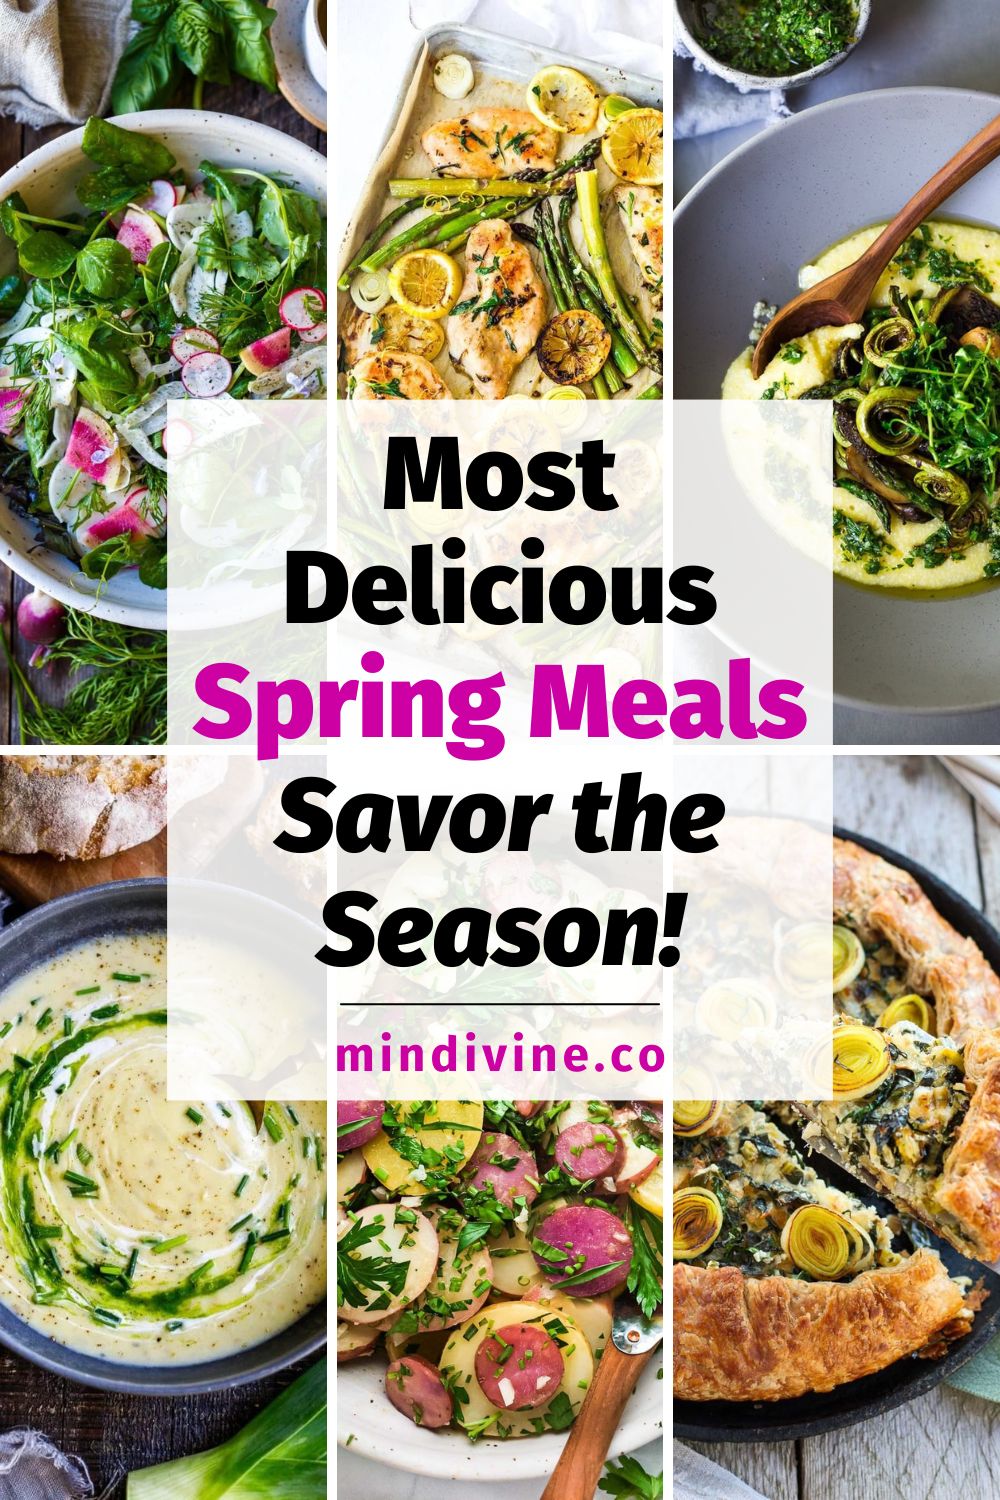 Spring Meals: 3 Fresh, Delicious And Very Healthy Recipes